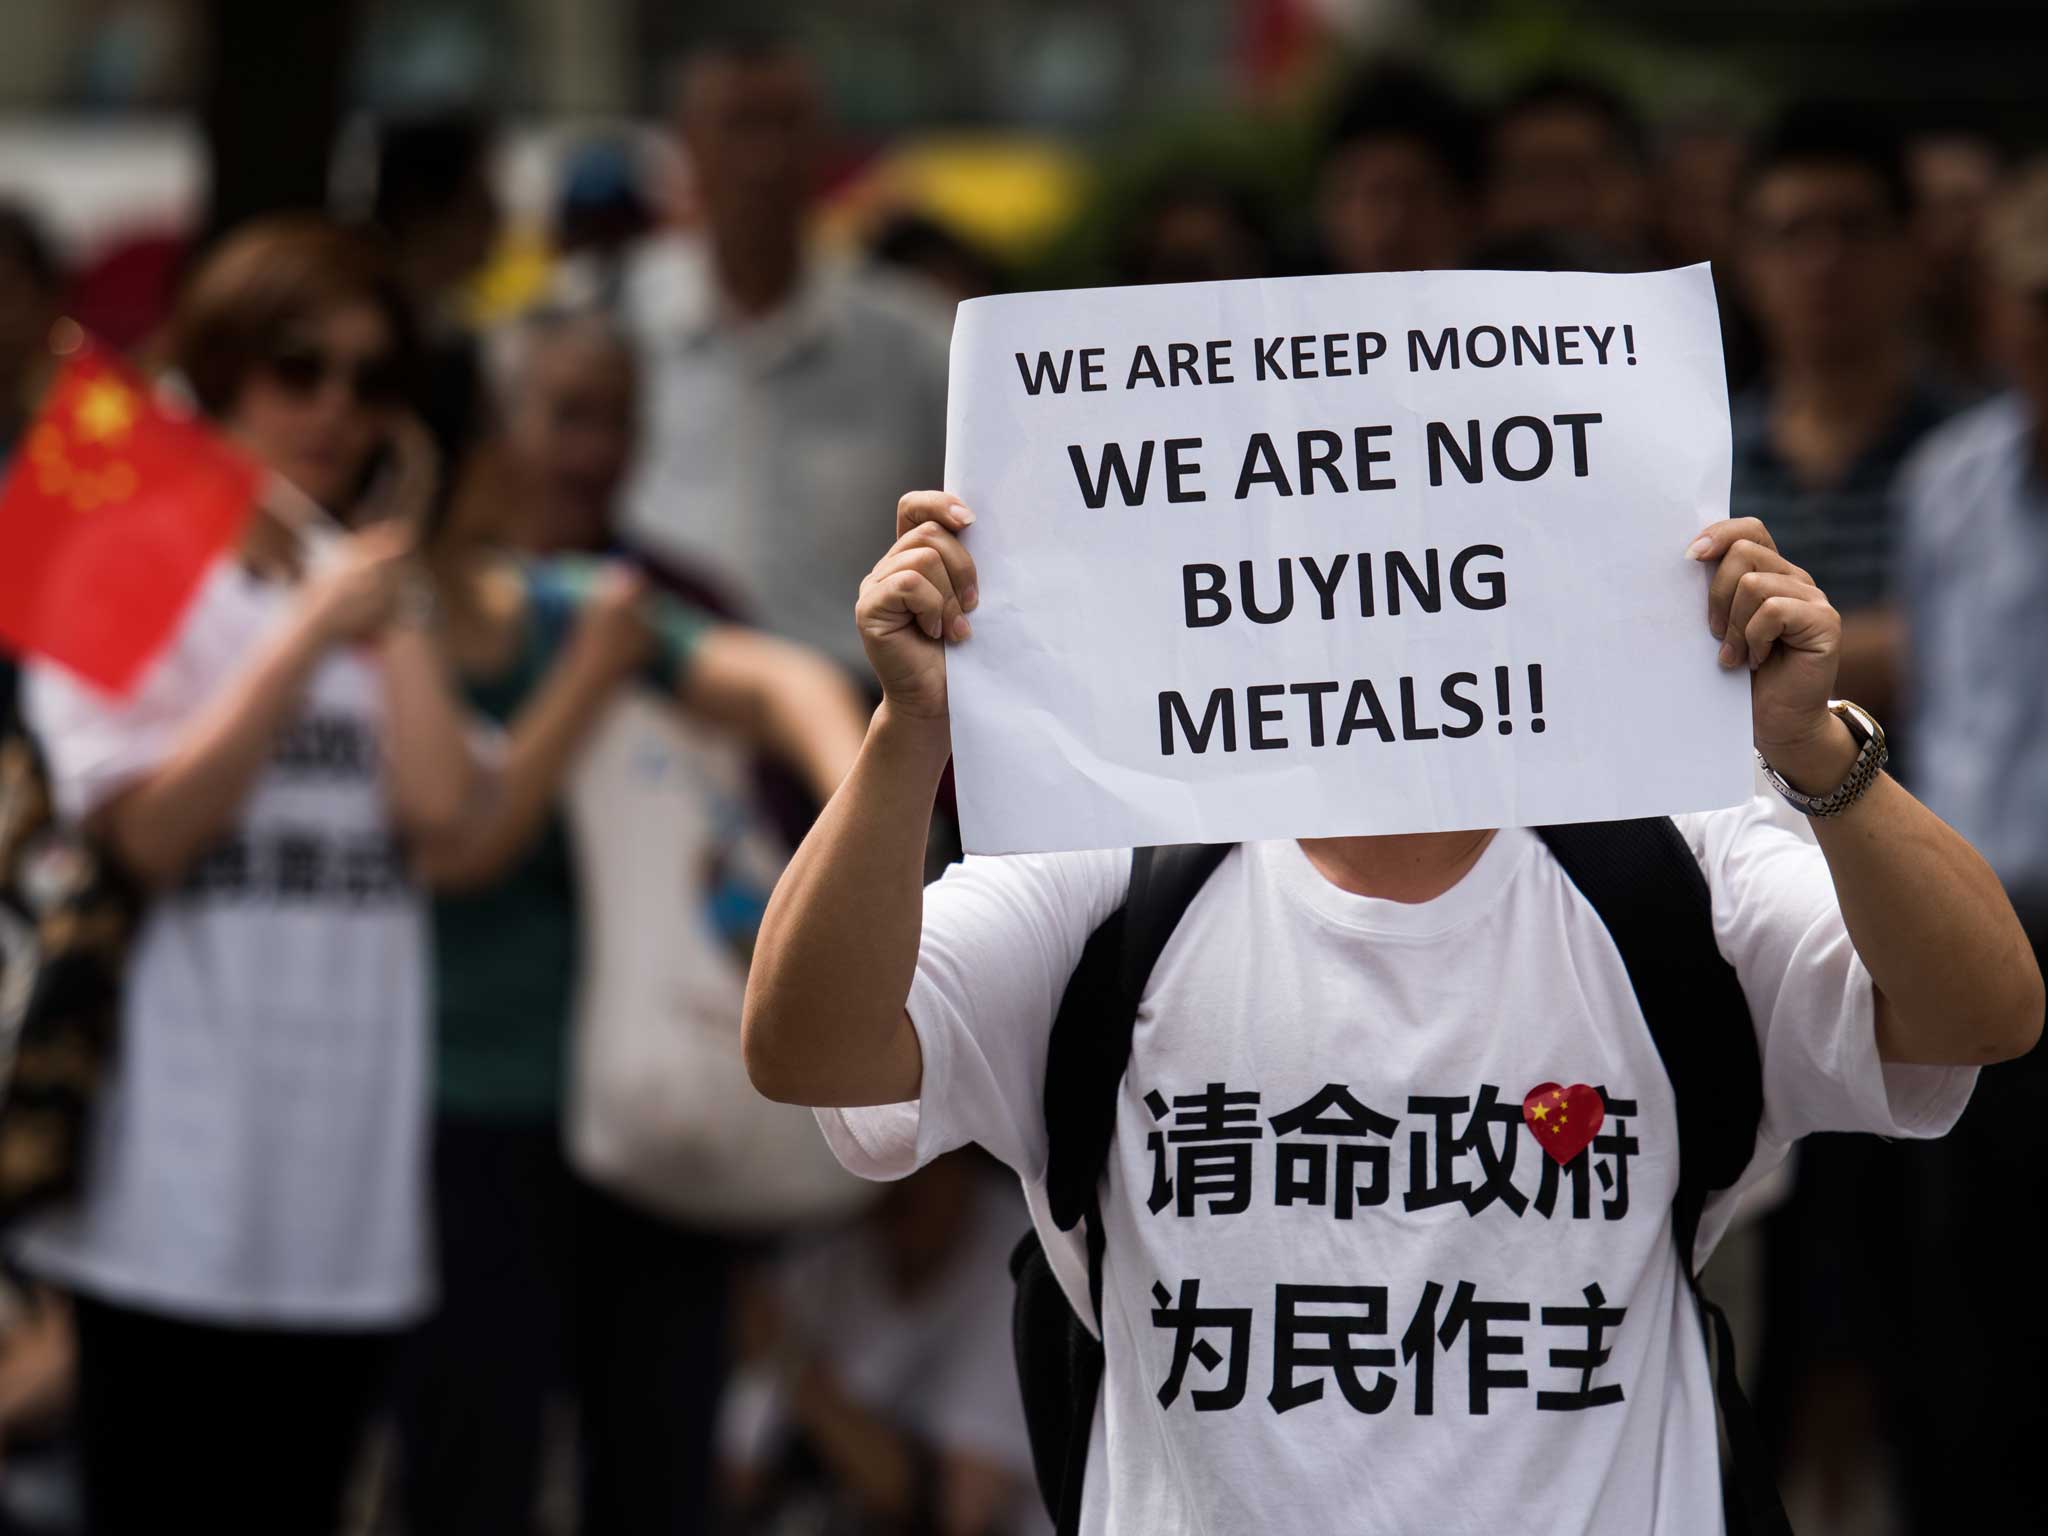 People protest outside the office of the China Insurance Regulatory Commission in Shanghai on September 25, 2015 claiming they were tricked by the Fanya metals exchange. Chinese speculators who claim to have lost money on risky investments mounted a rare protest in Shanghai